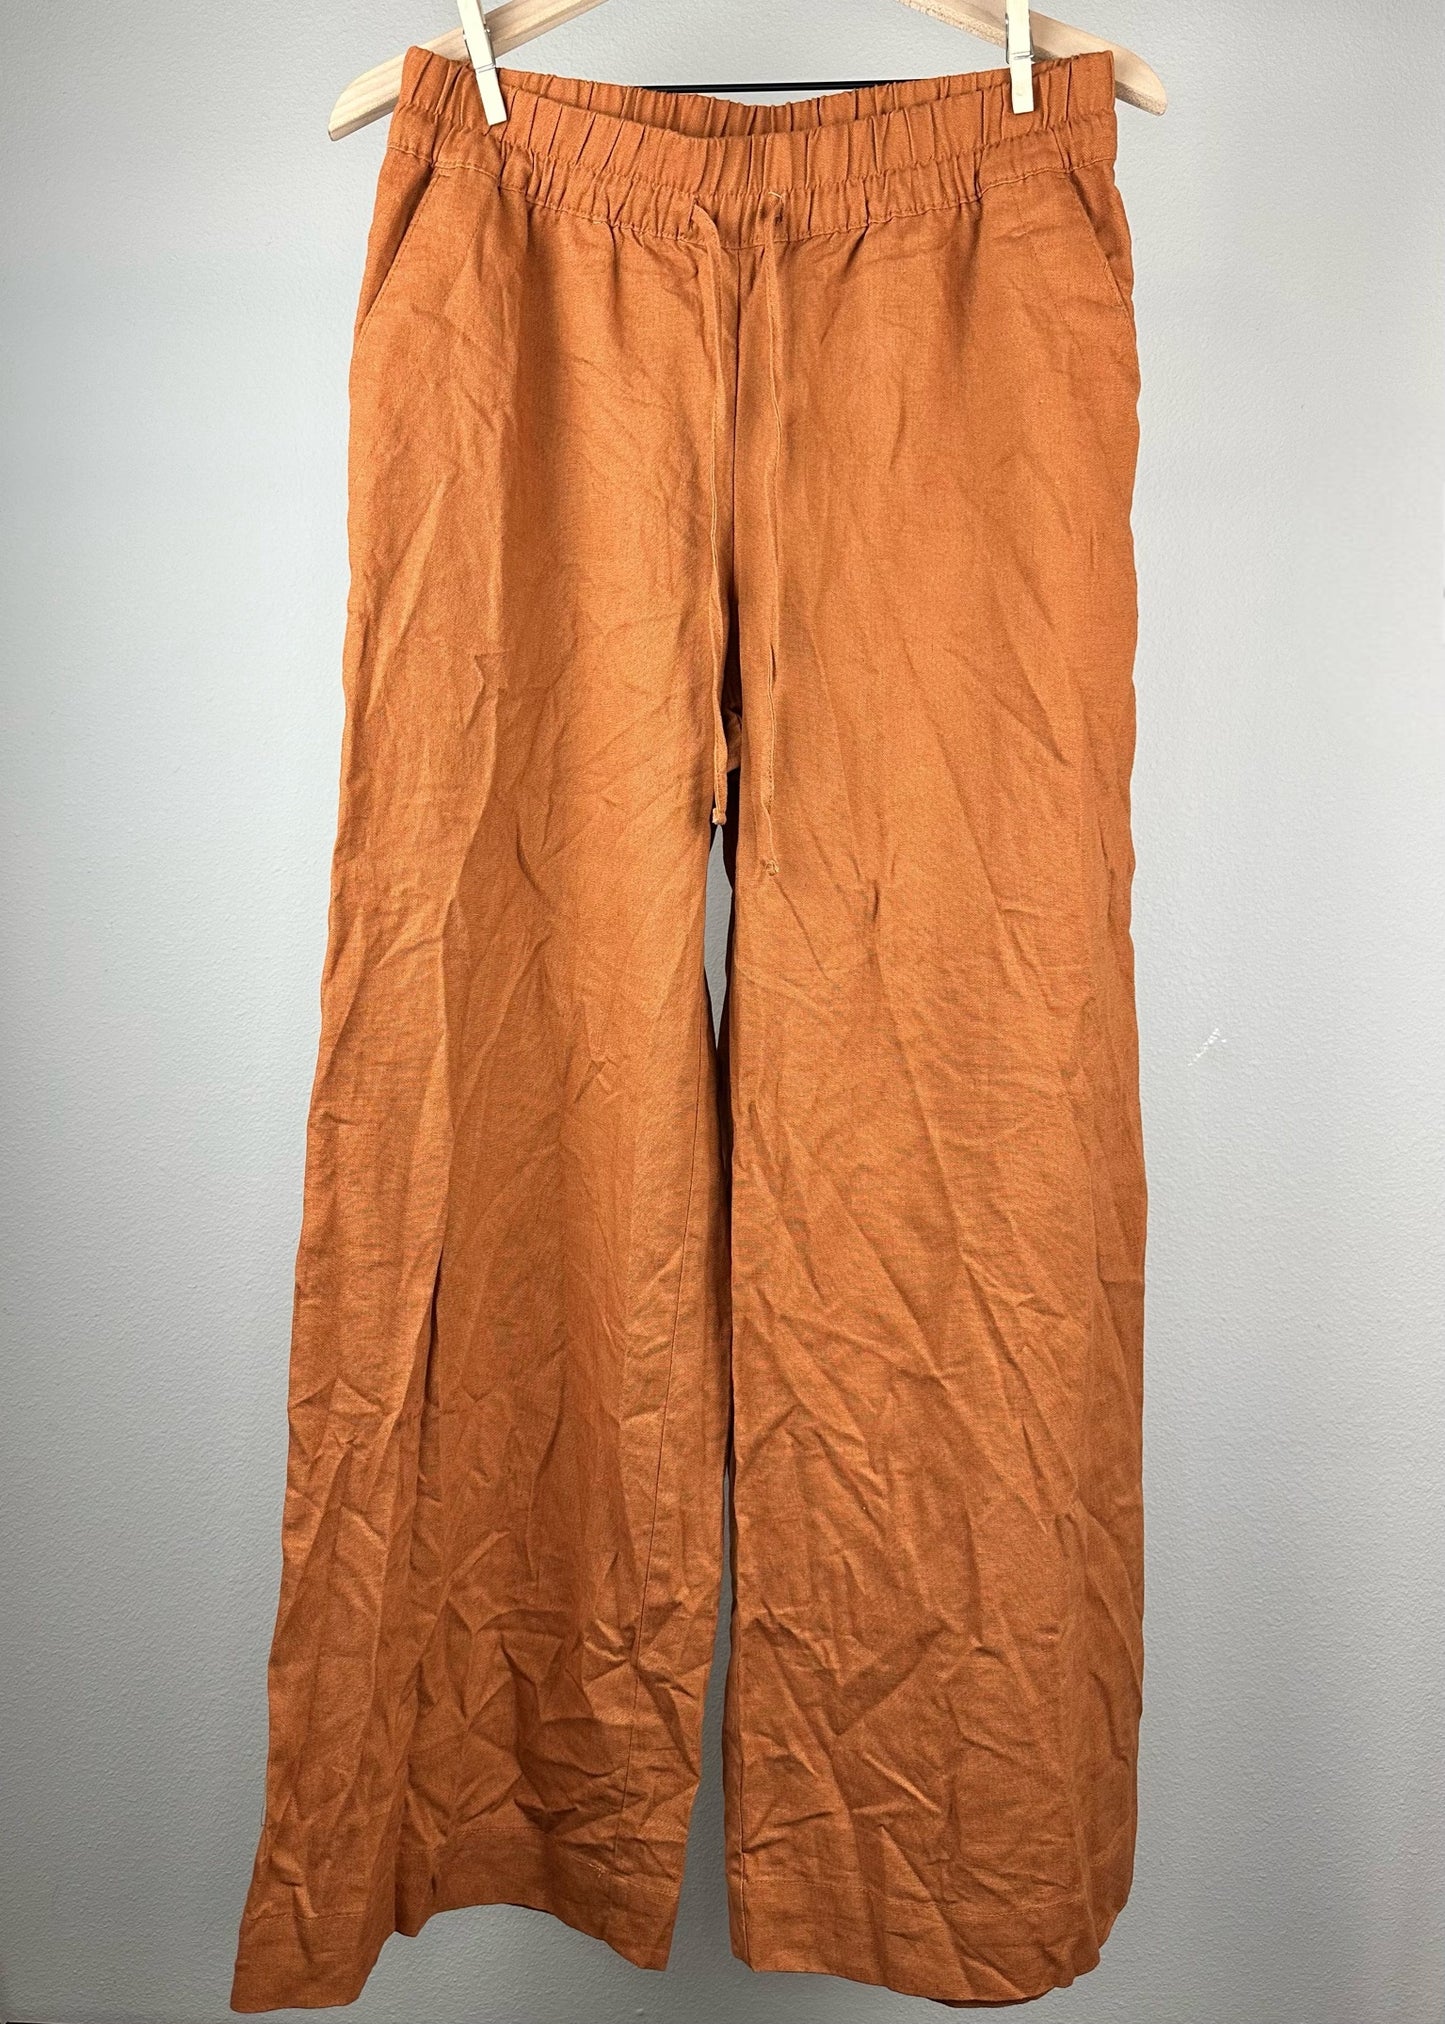 Burnt Orange Wide Leg Pants by A New Day